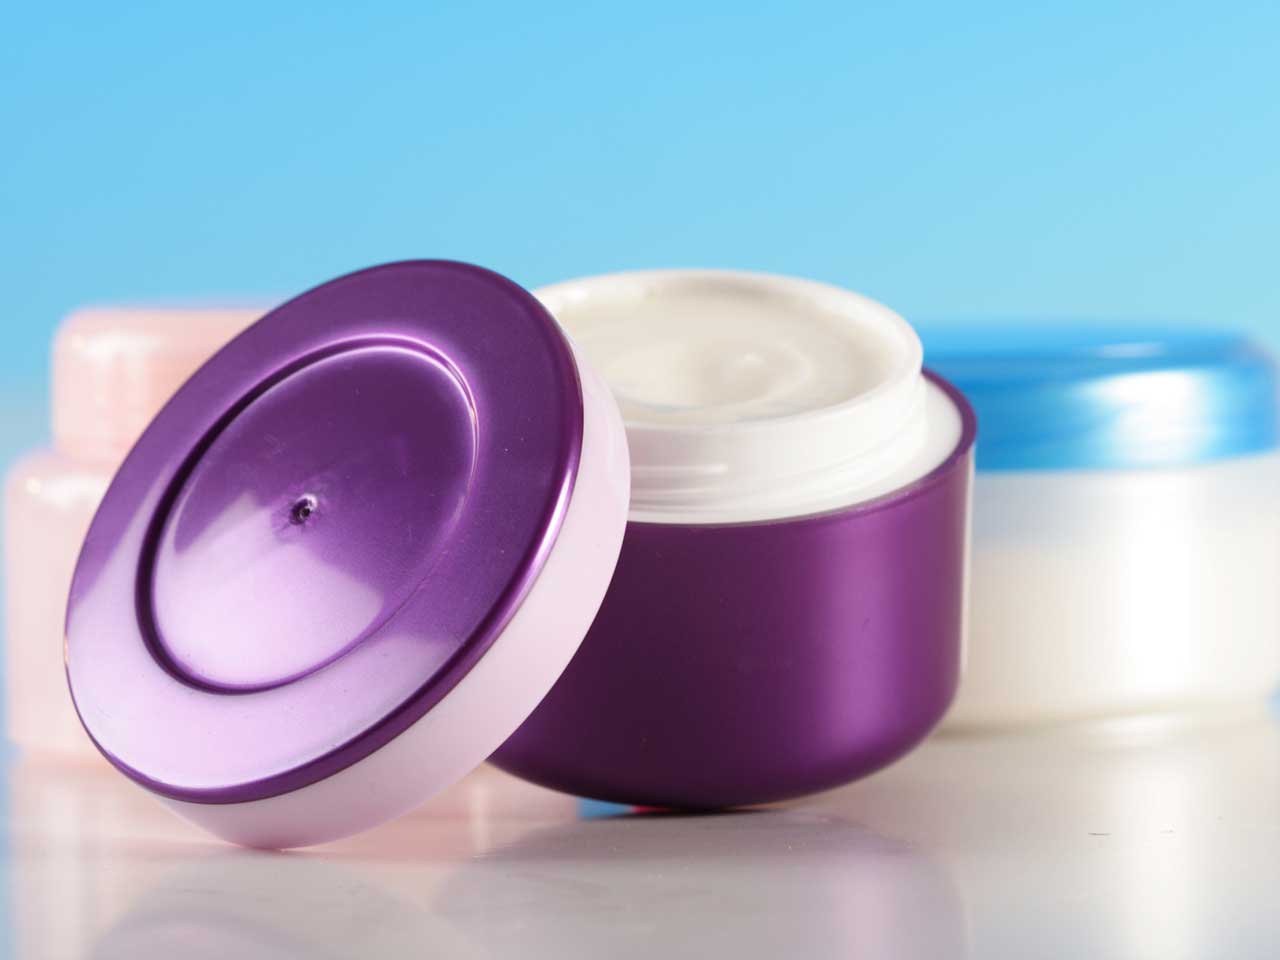 Sample pots of lotions and creams